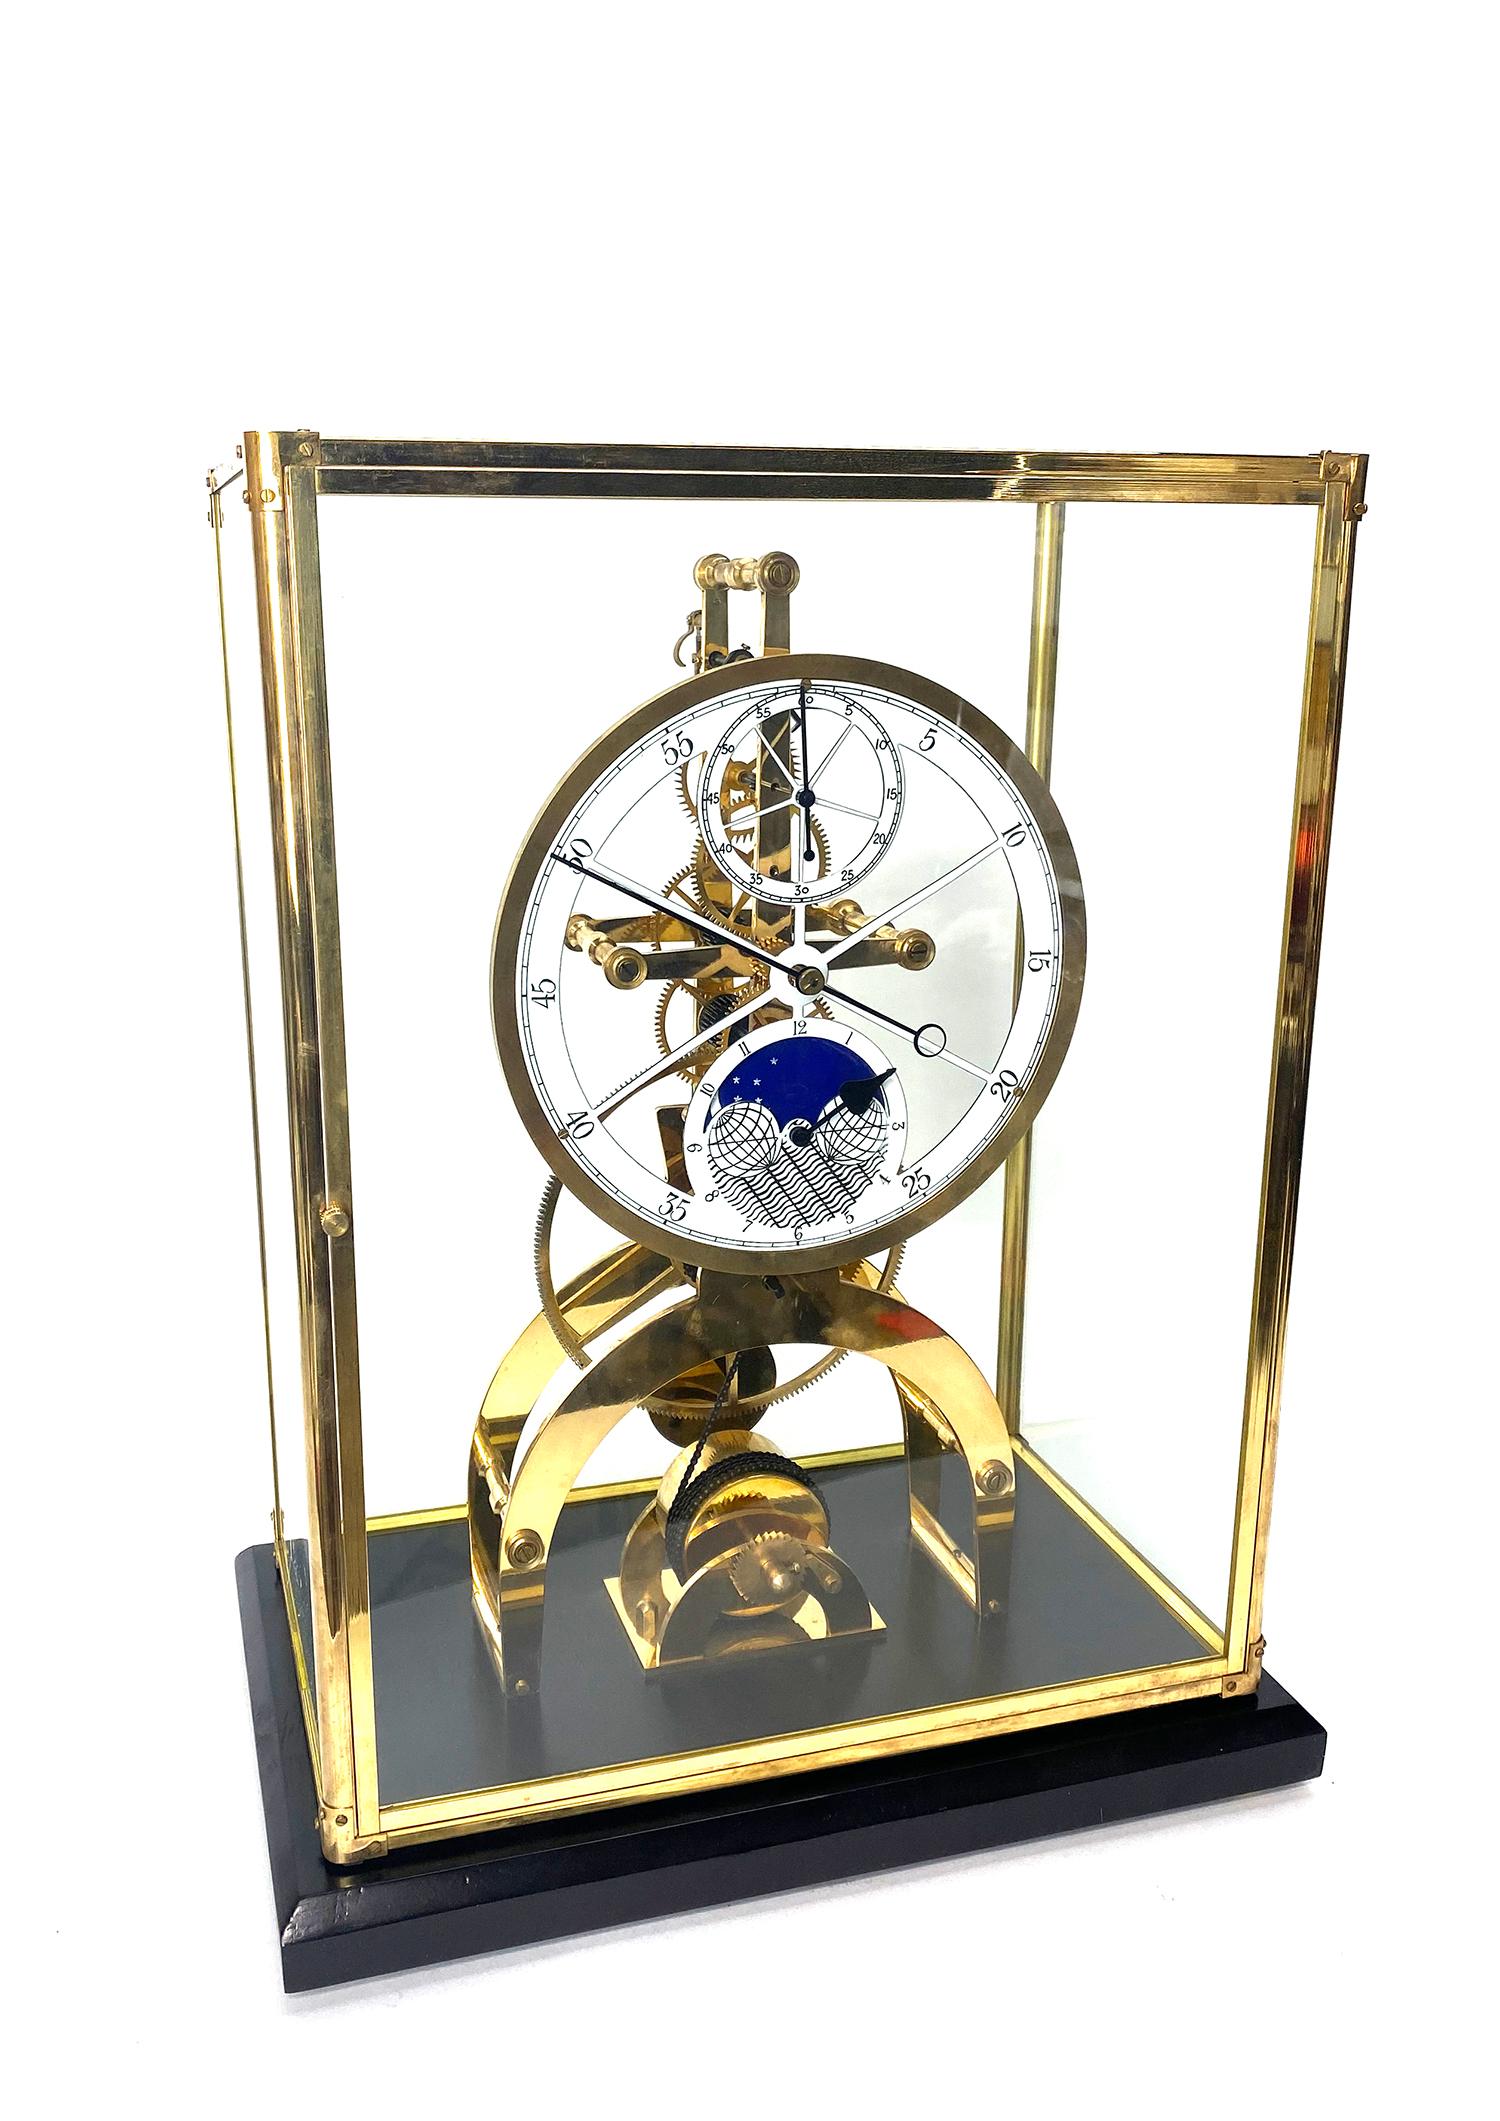 24k Astronomical Porcelain dial 8 day Fusee chain Skeleton clock with moon dial

Here is a very nice looking 24K plated large skeleton clock, housed inside a brass frame glass case. It has a front opening door, so you can easily set and wind the